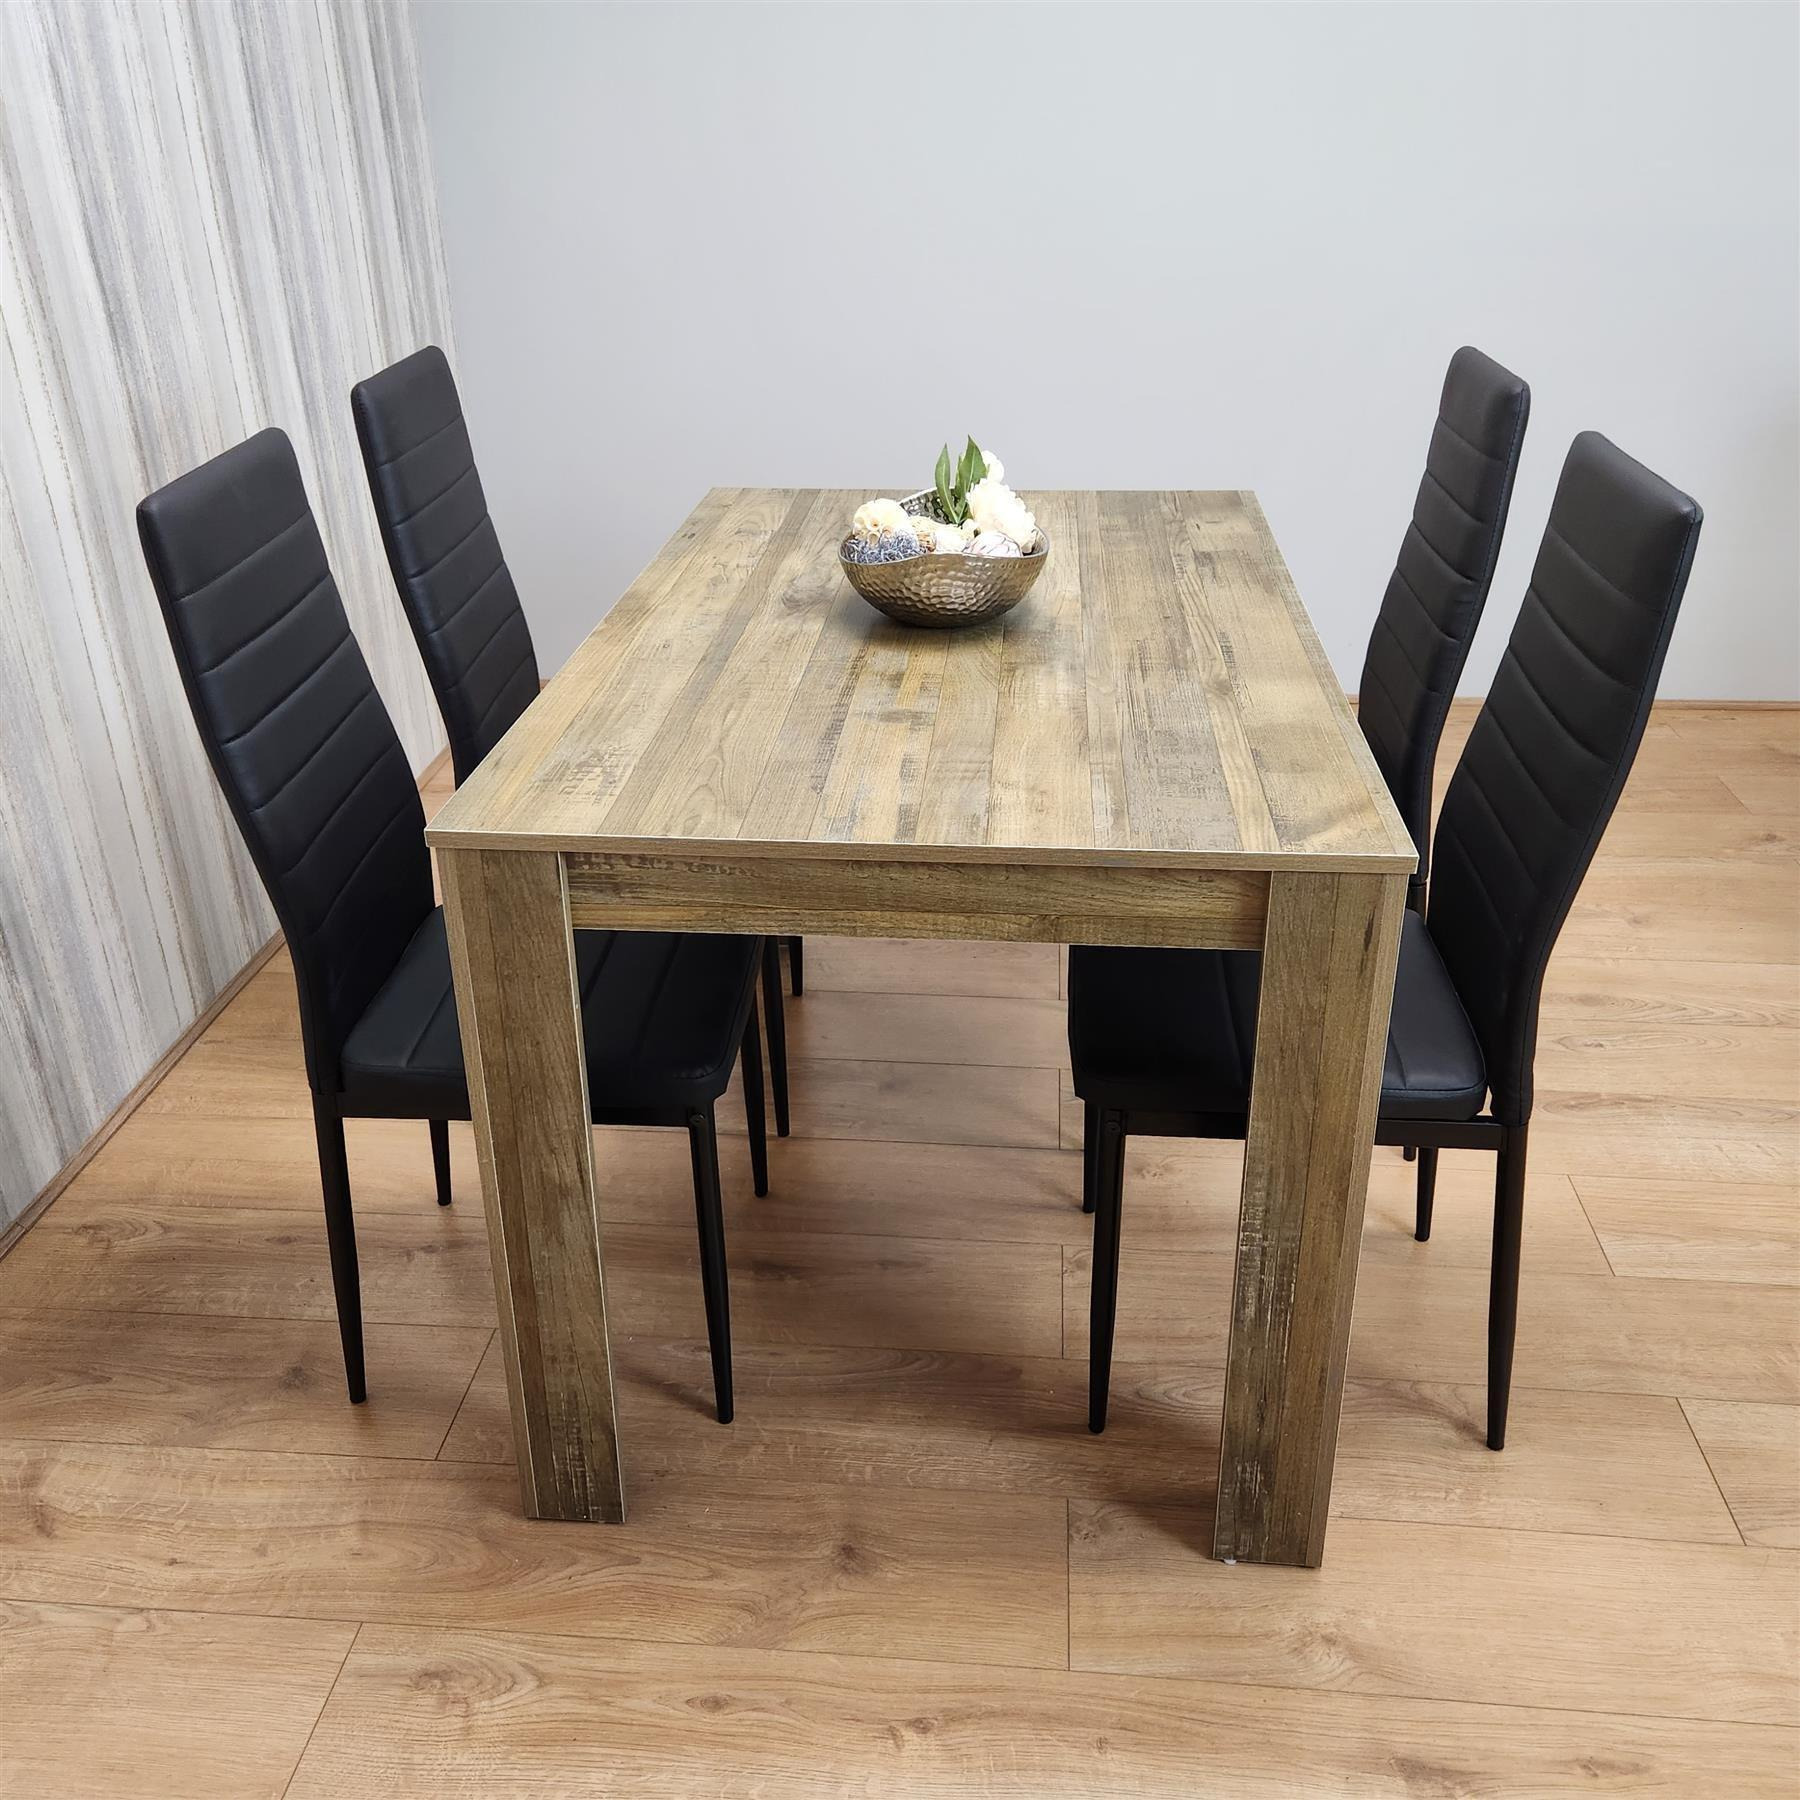 Dining Table Set with 4 Chairs Dining Room and Kitchen table set of 4 - image 1